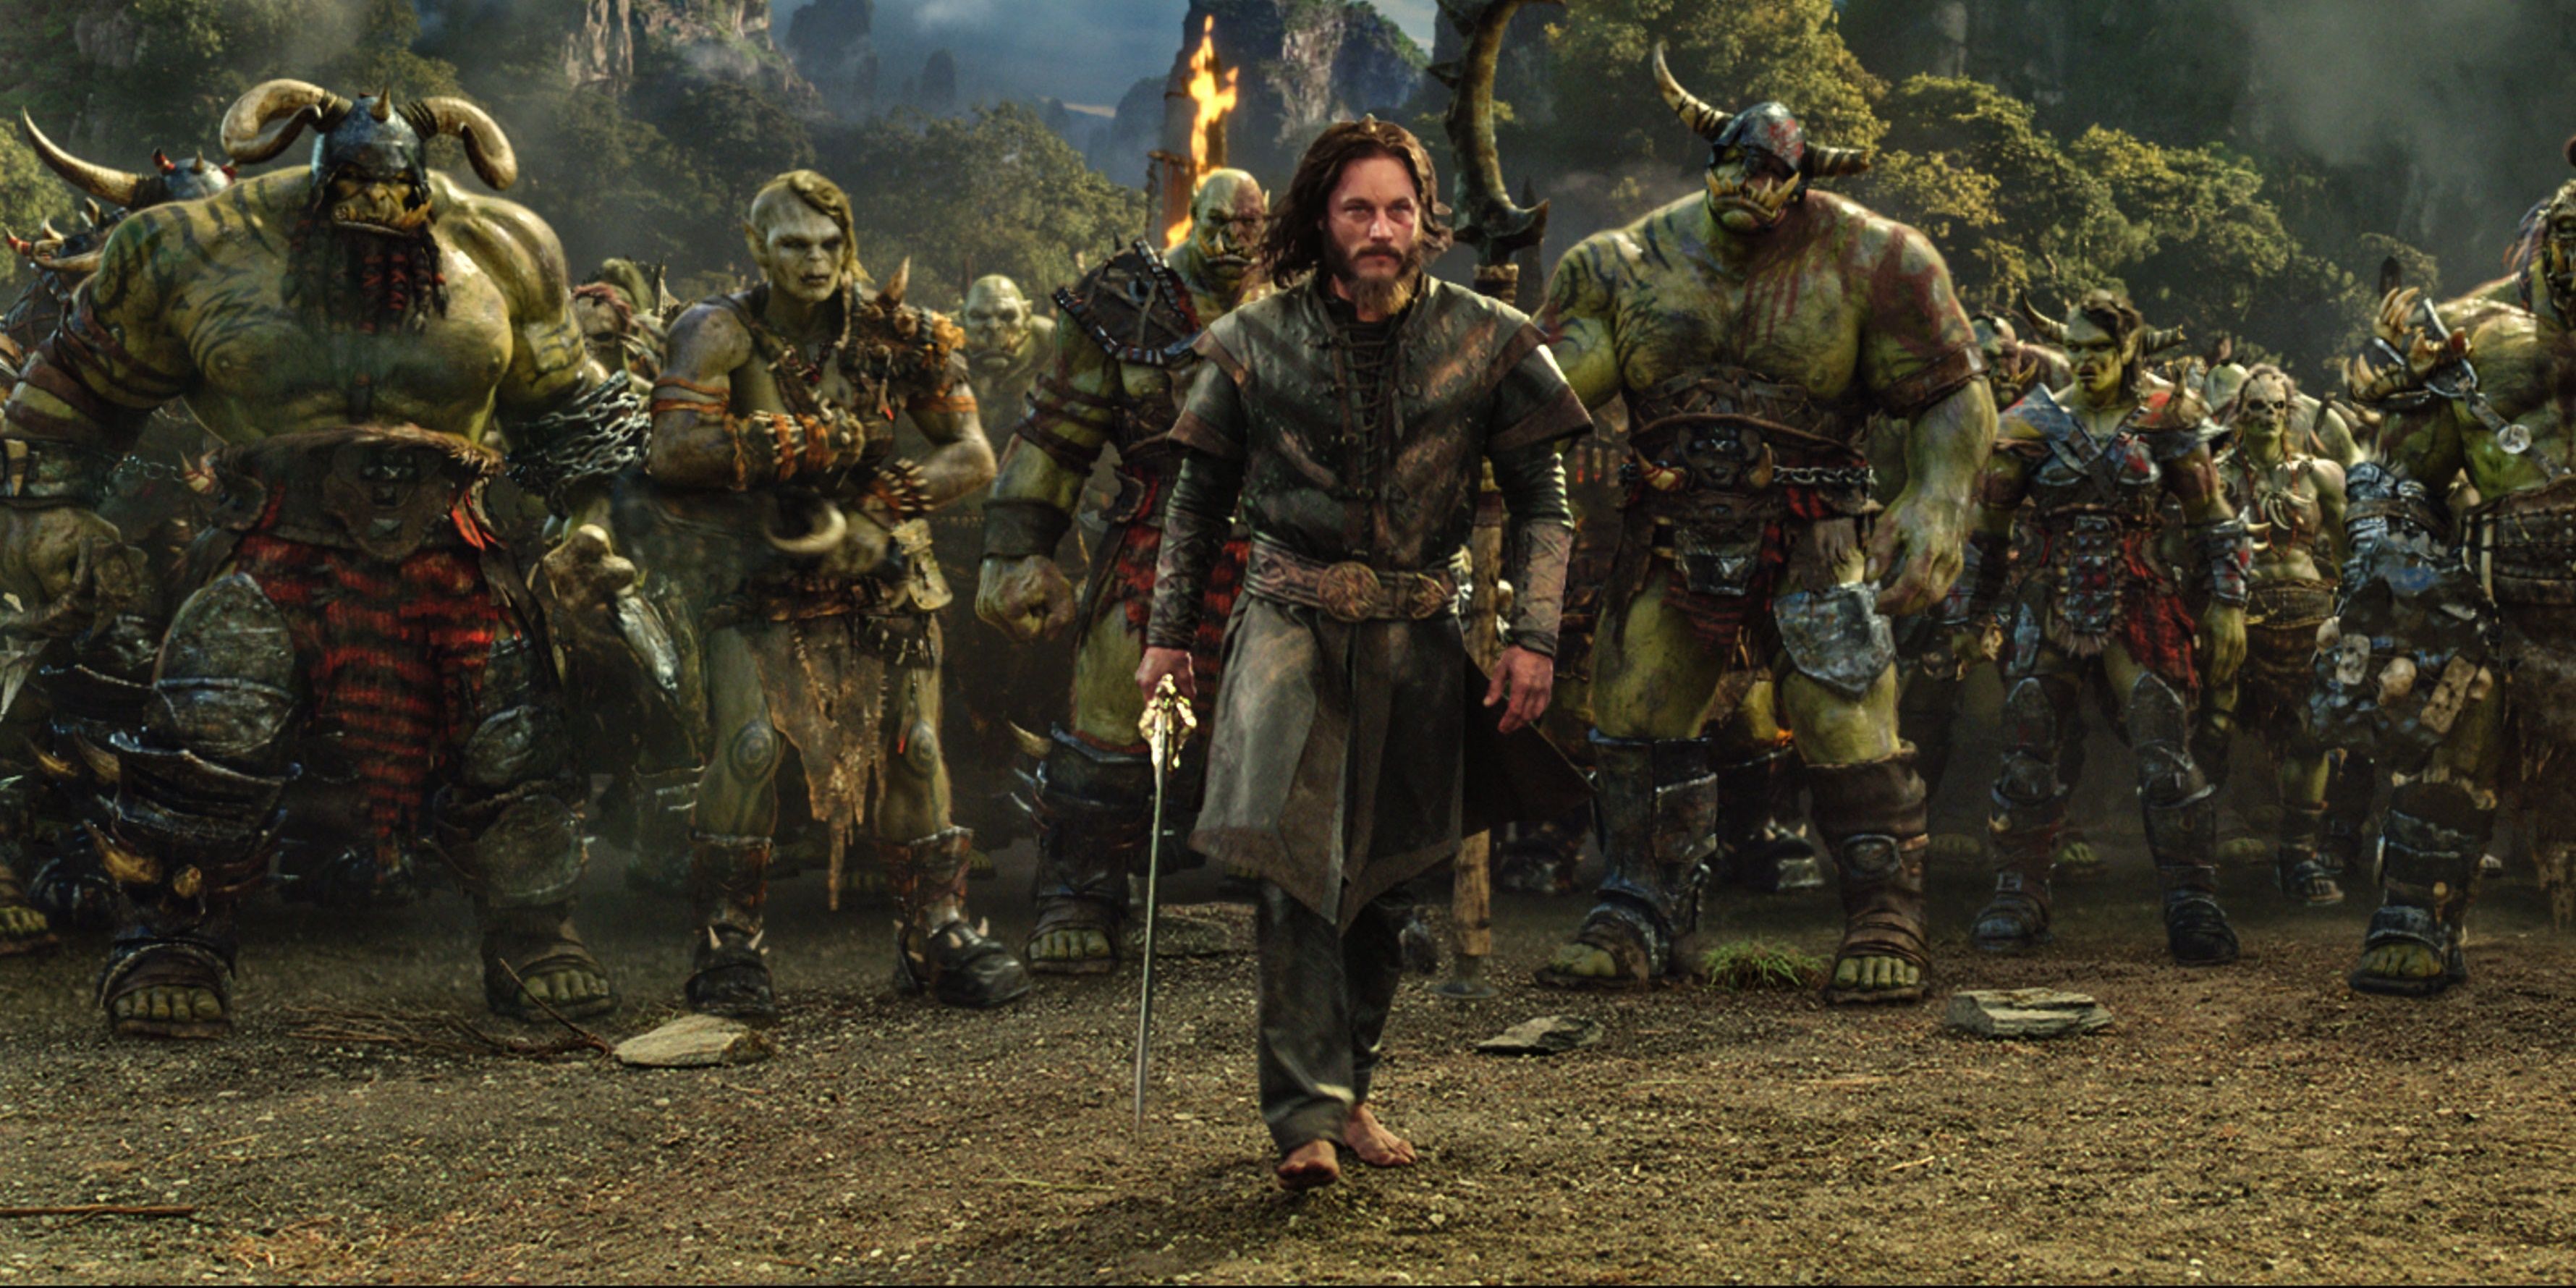 Warcraft Movie Anduin with Orcs